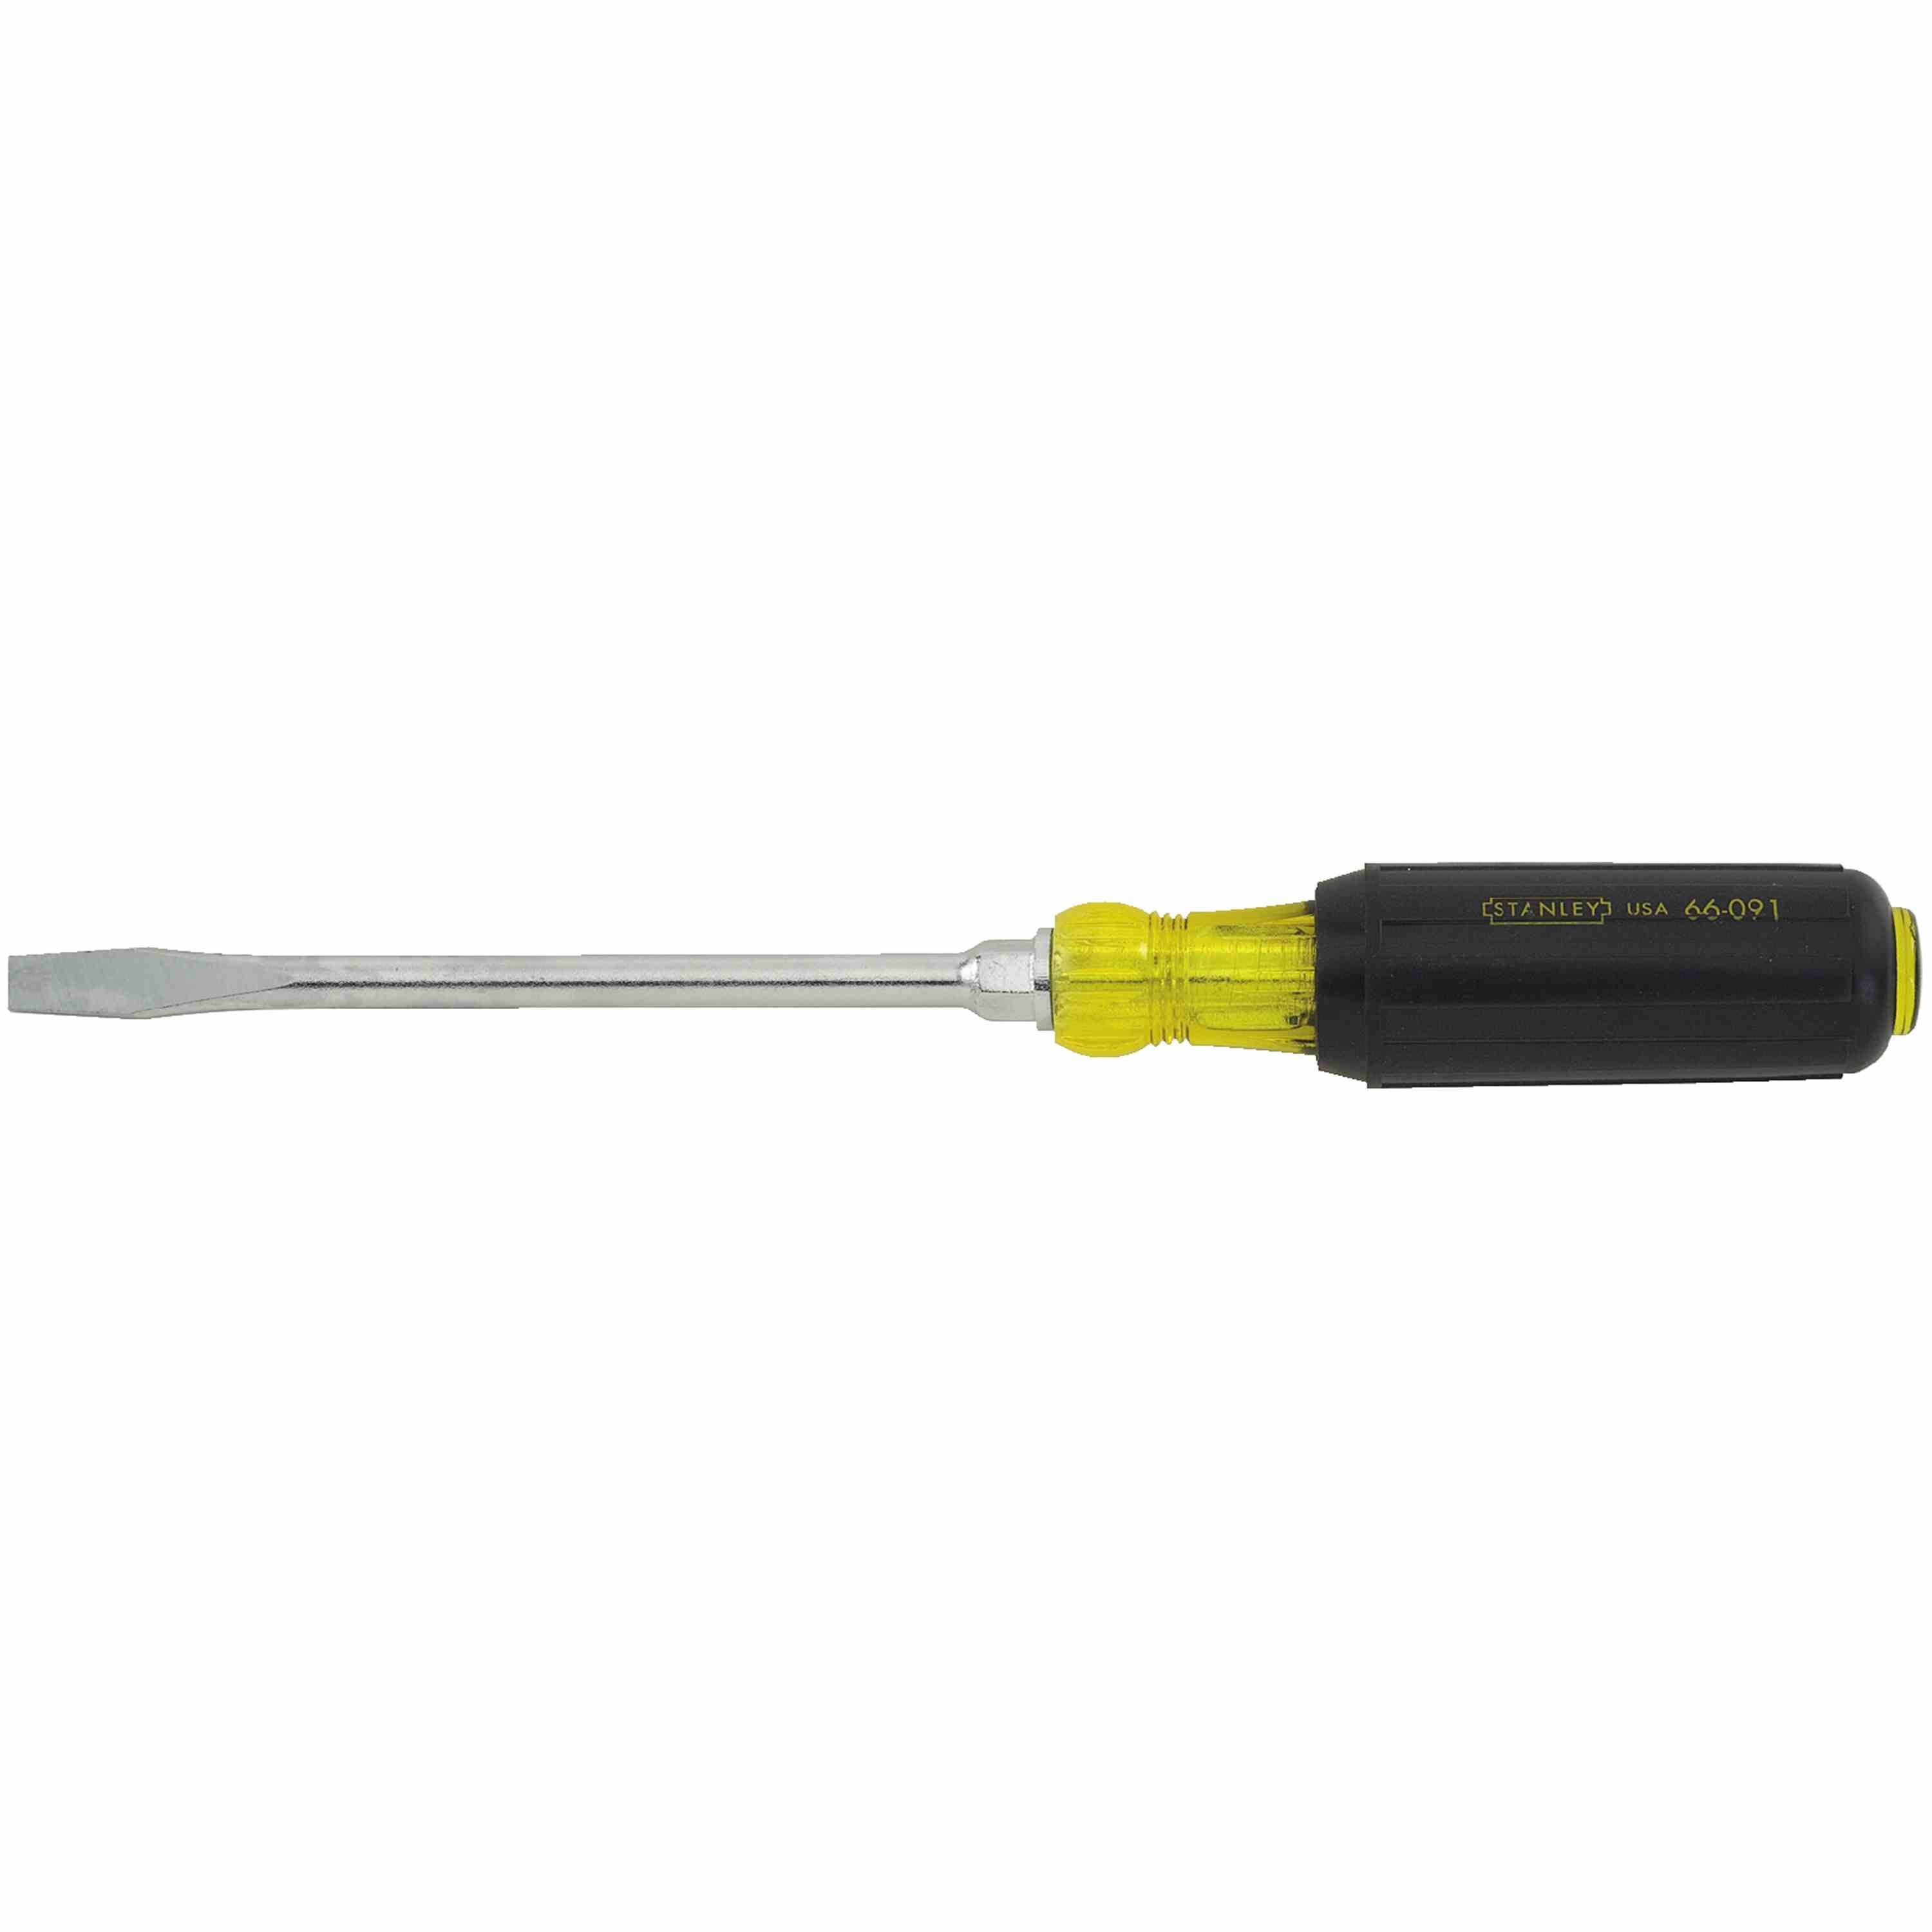 6 Way Screwdriver 2-Cross 68-012 1/4 & 5/16 Nut Drivers 2-Slotted STANLEY 